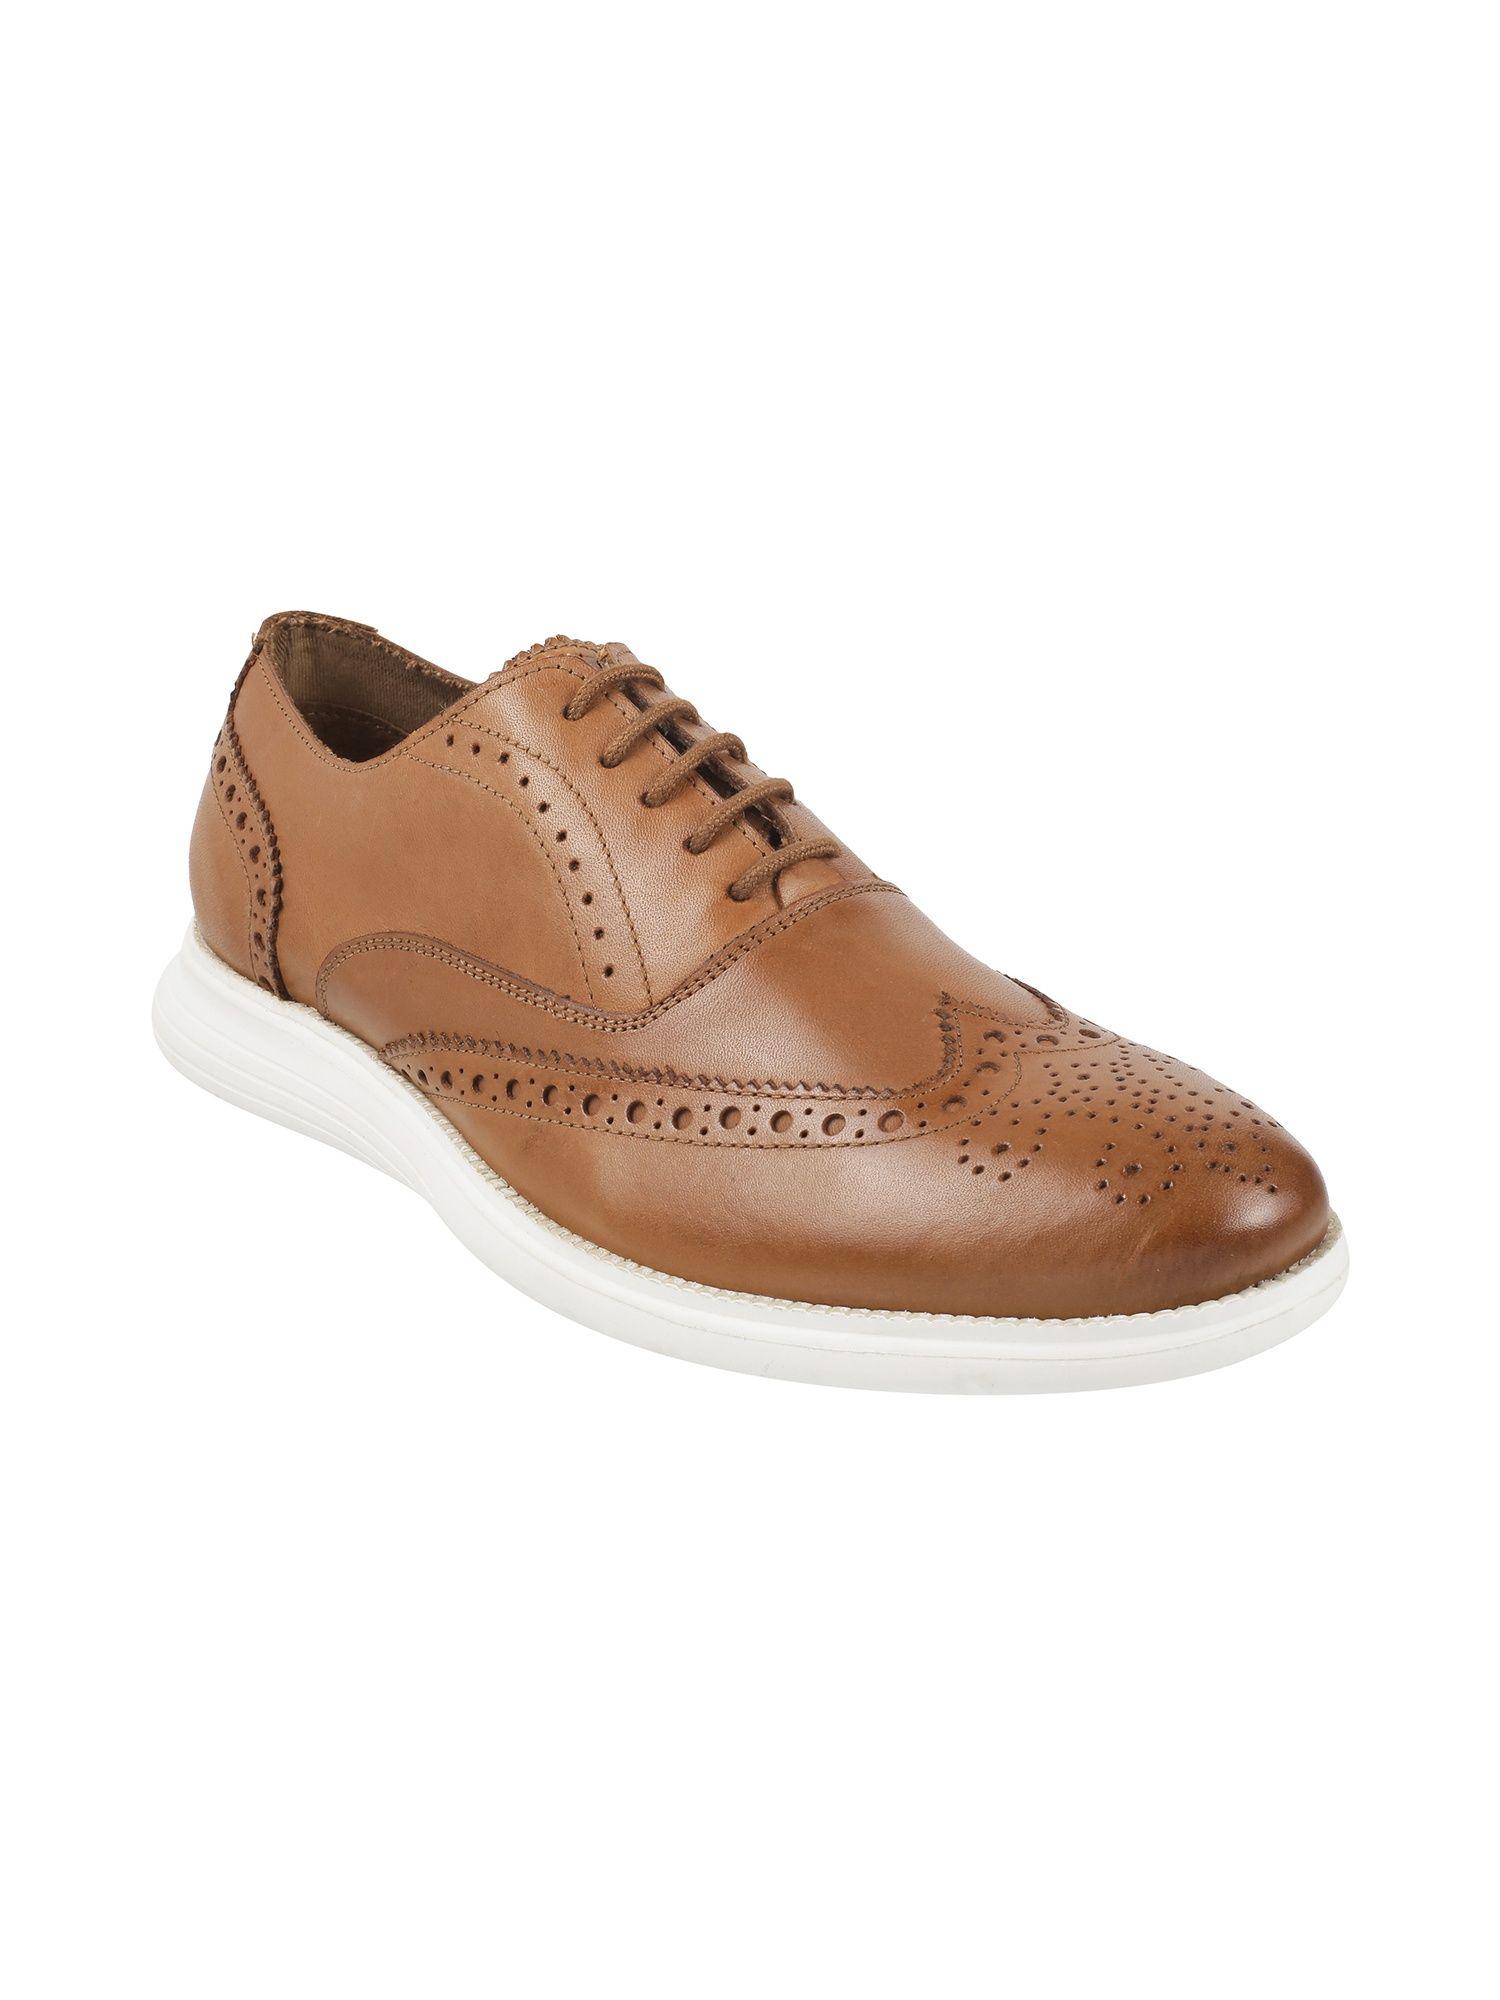 mens tan lace-ups shoesmetro tan leather solid brogues